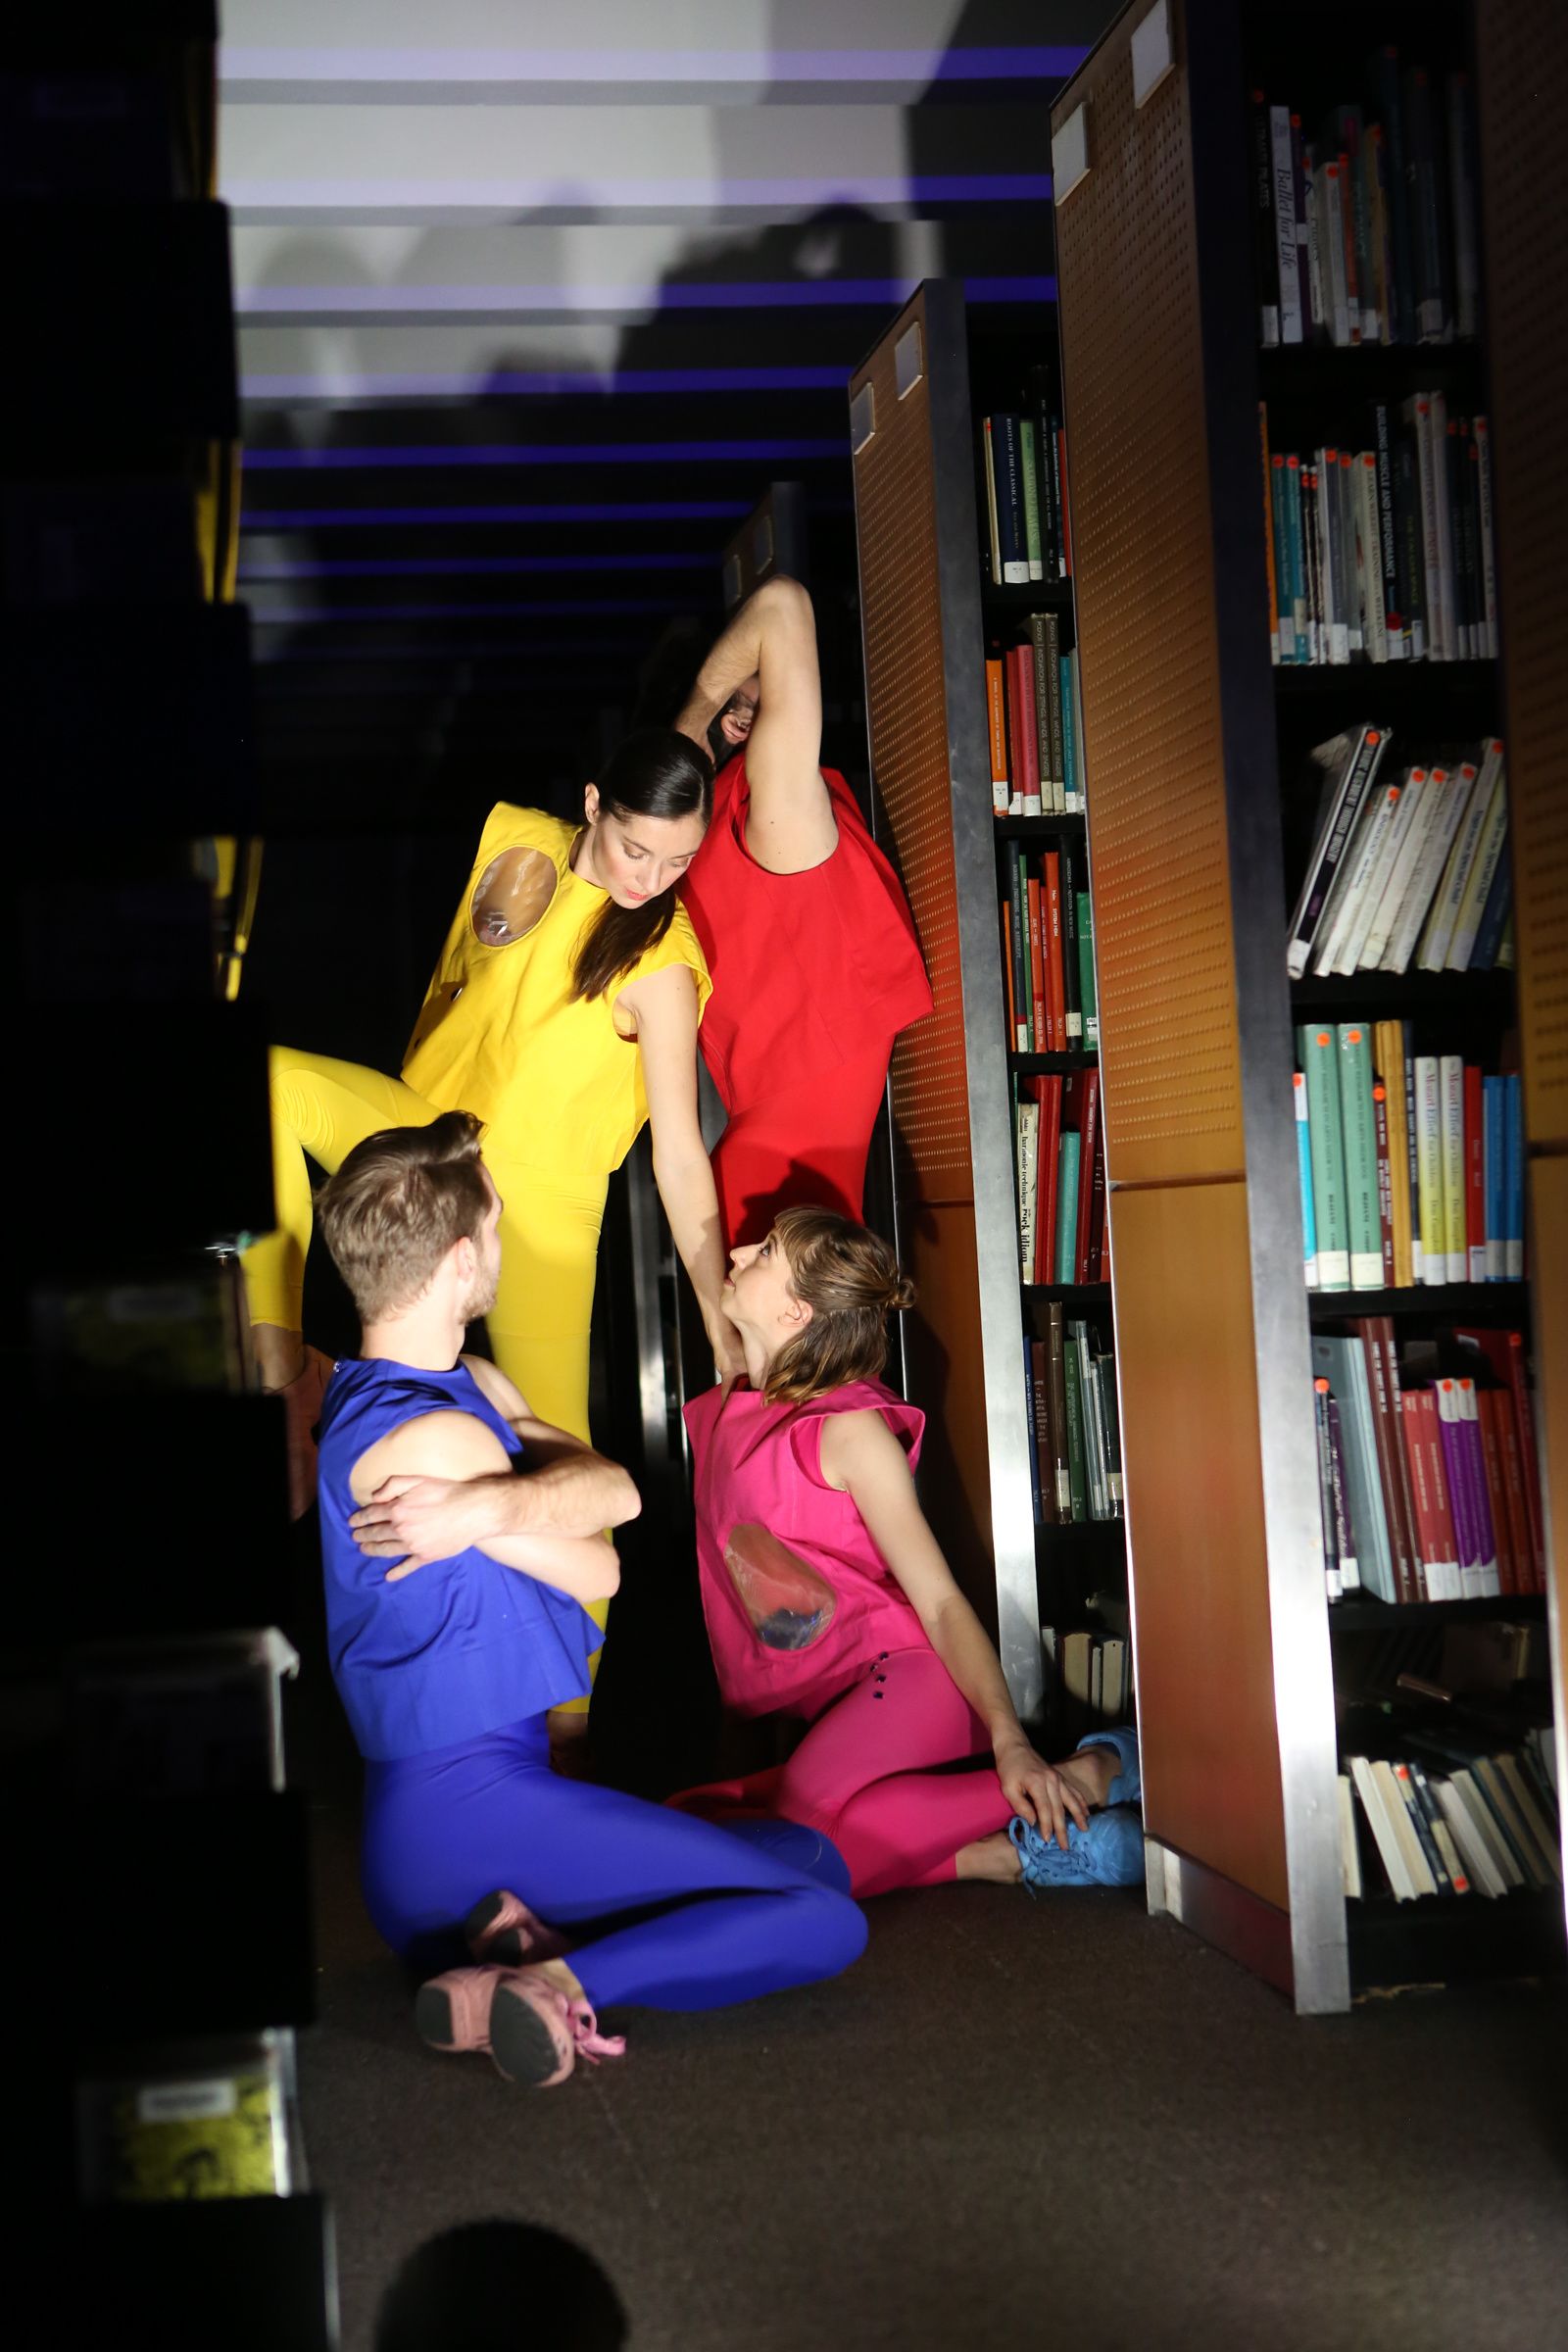 Four dancers in red, yellow, blue, and pink pose in a narrow aisle between bookshelves. The two closest to the front are seated on one hip, looking up at the other two. The one in yellow balances on one leg, her hand resting atop one of her fellow's shoulders. Behind, a tall dancer in red stands facing a shelf, arm lifted to hide his face from view.